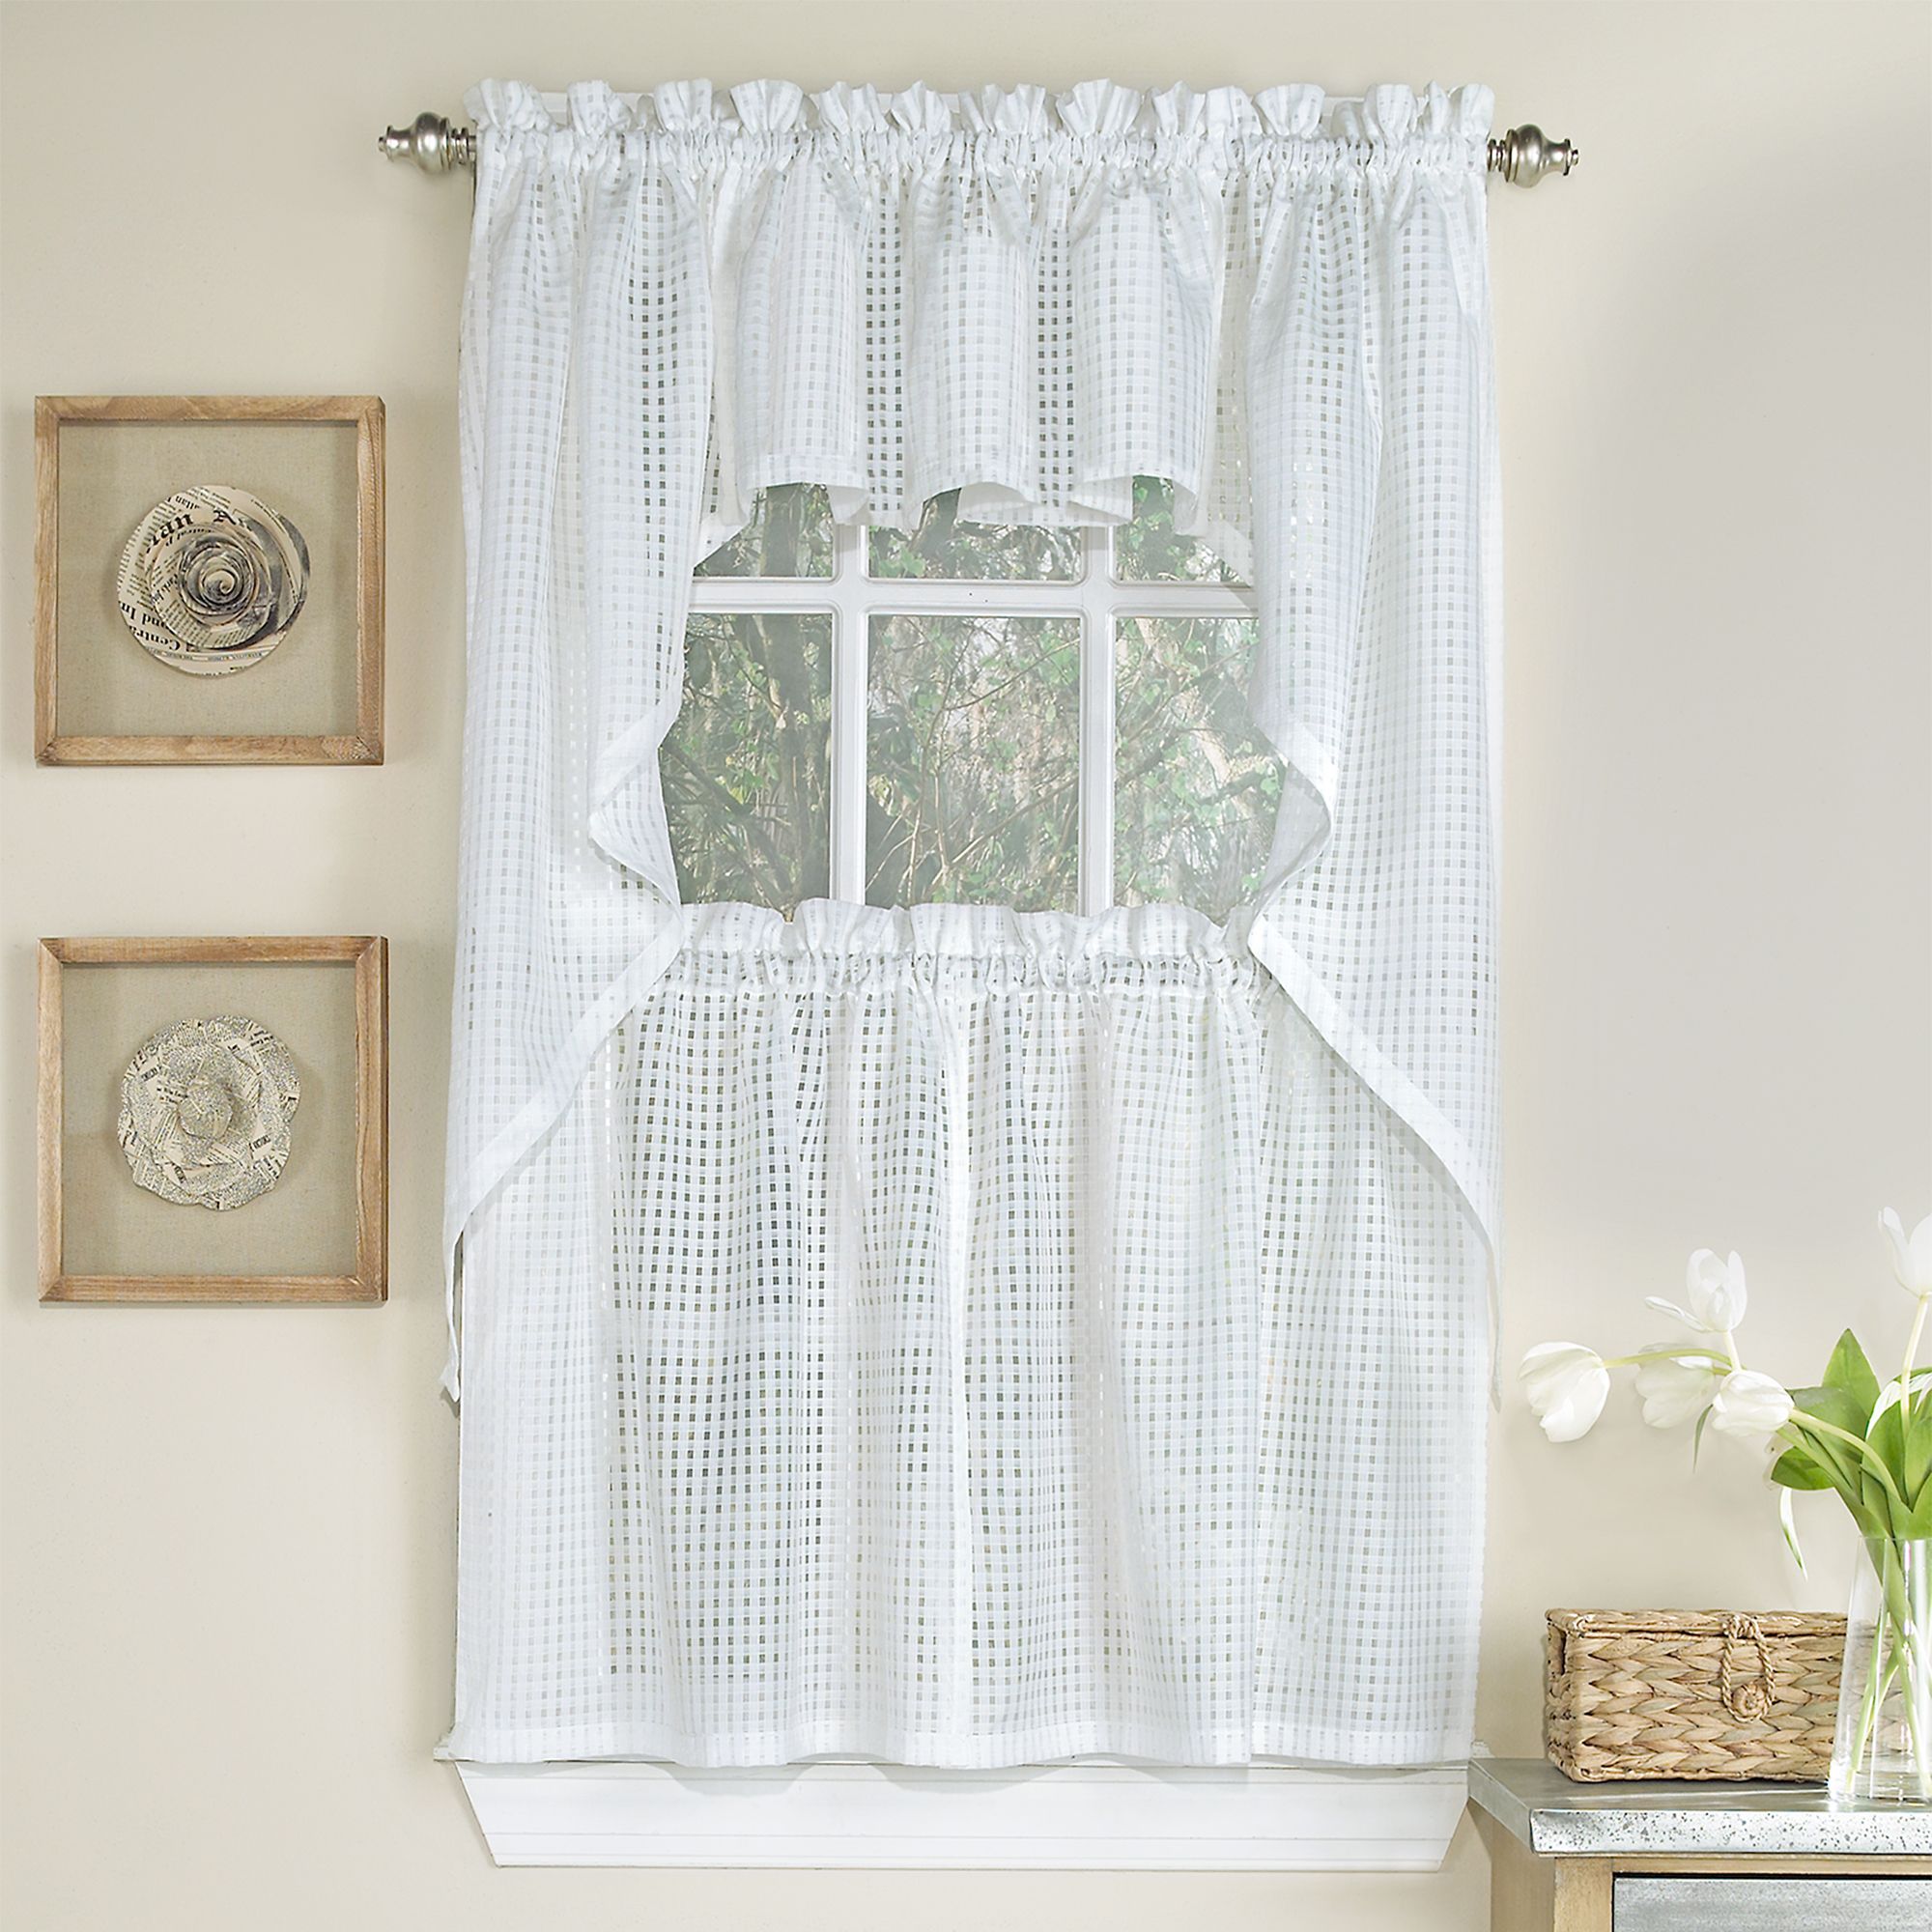 Details About Micro Check 2 Tone White Semi Sheer Window Curtain Tiers,  Valance, Or Swag Throughout White Knit Lace Bird Motif Window Curtain Tiers (Photo 8 of 20)